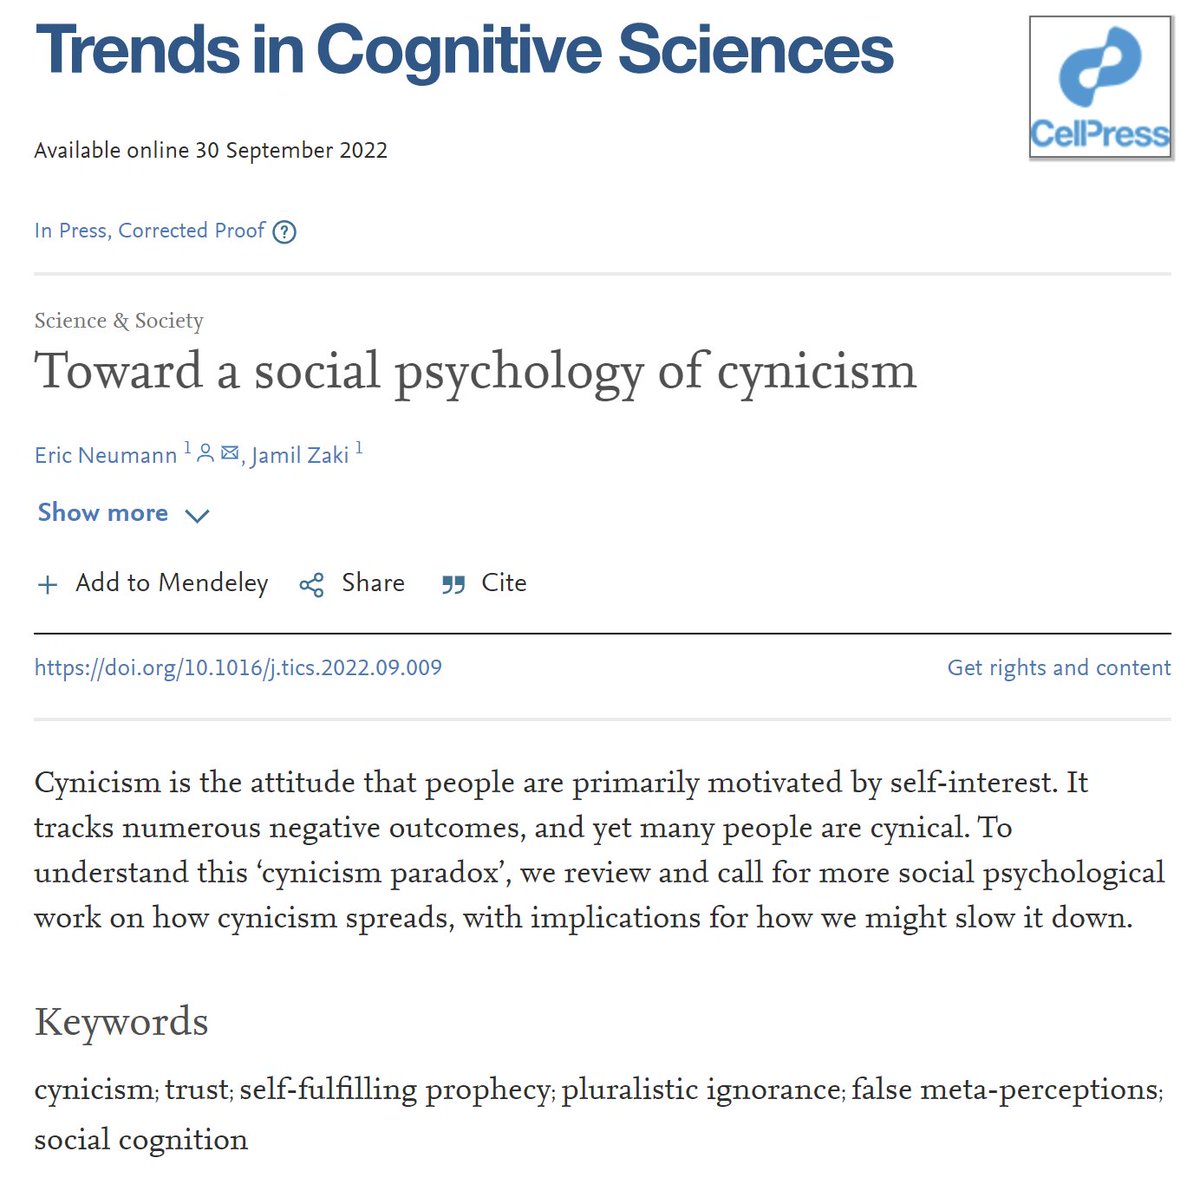 My new paper with @zakijam is now officially published online @TrendsCognSci! Being cynical is painful, and yet many people are cynical. We argue social psychology can explain why: it is easy to get stuck in a cynical mindset. 50 days free full access: authors.elsevier.com/a/1fqwL4sIRvLY…